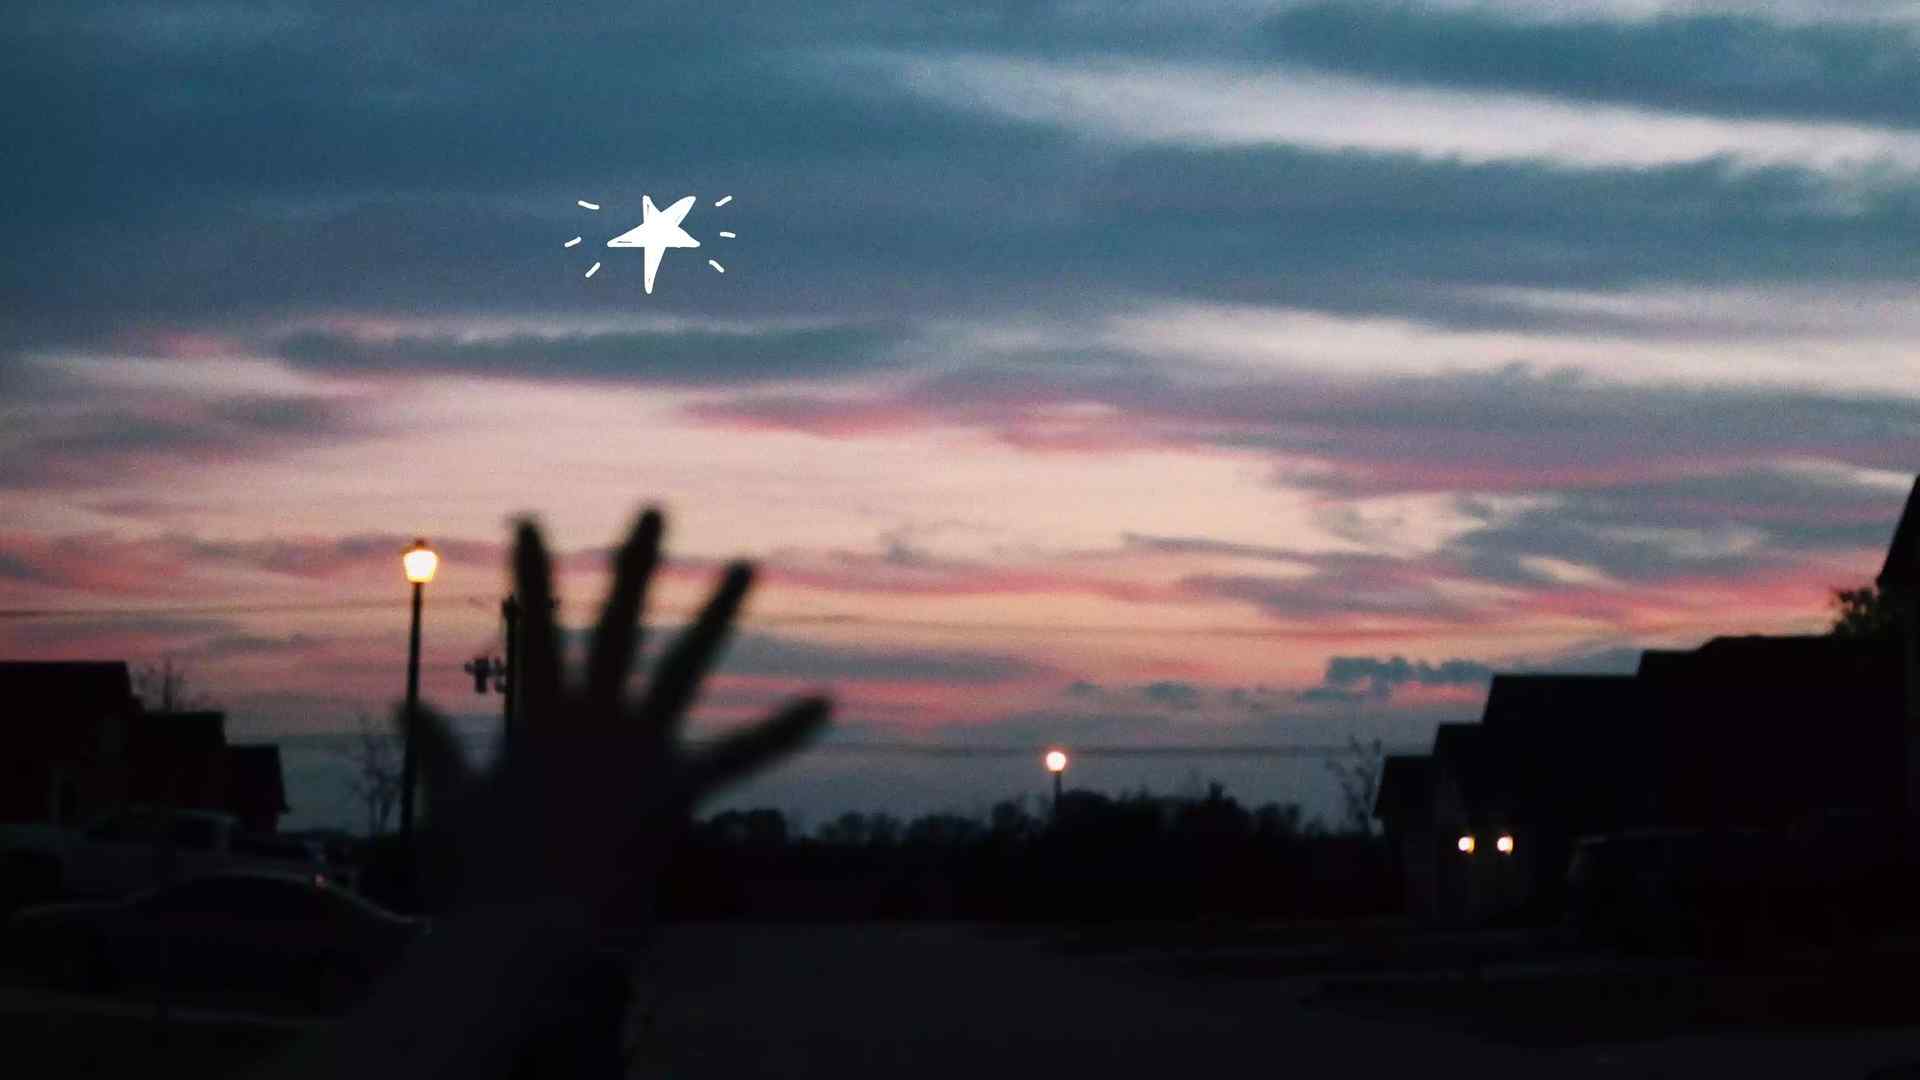 A sunset with hand drawn stars